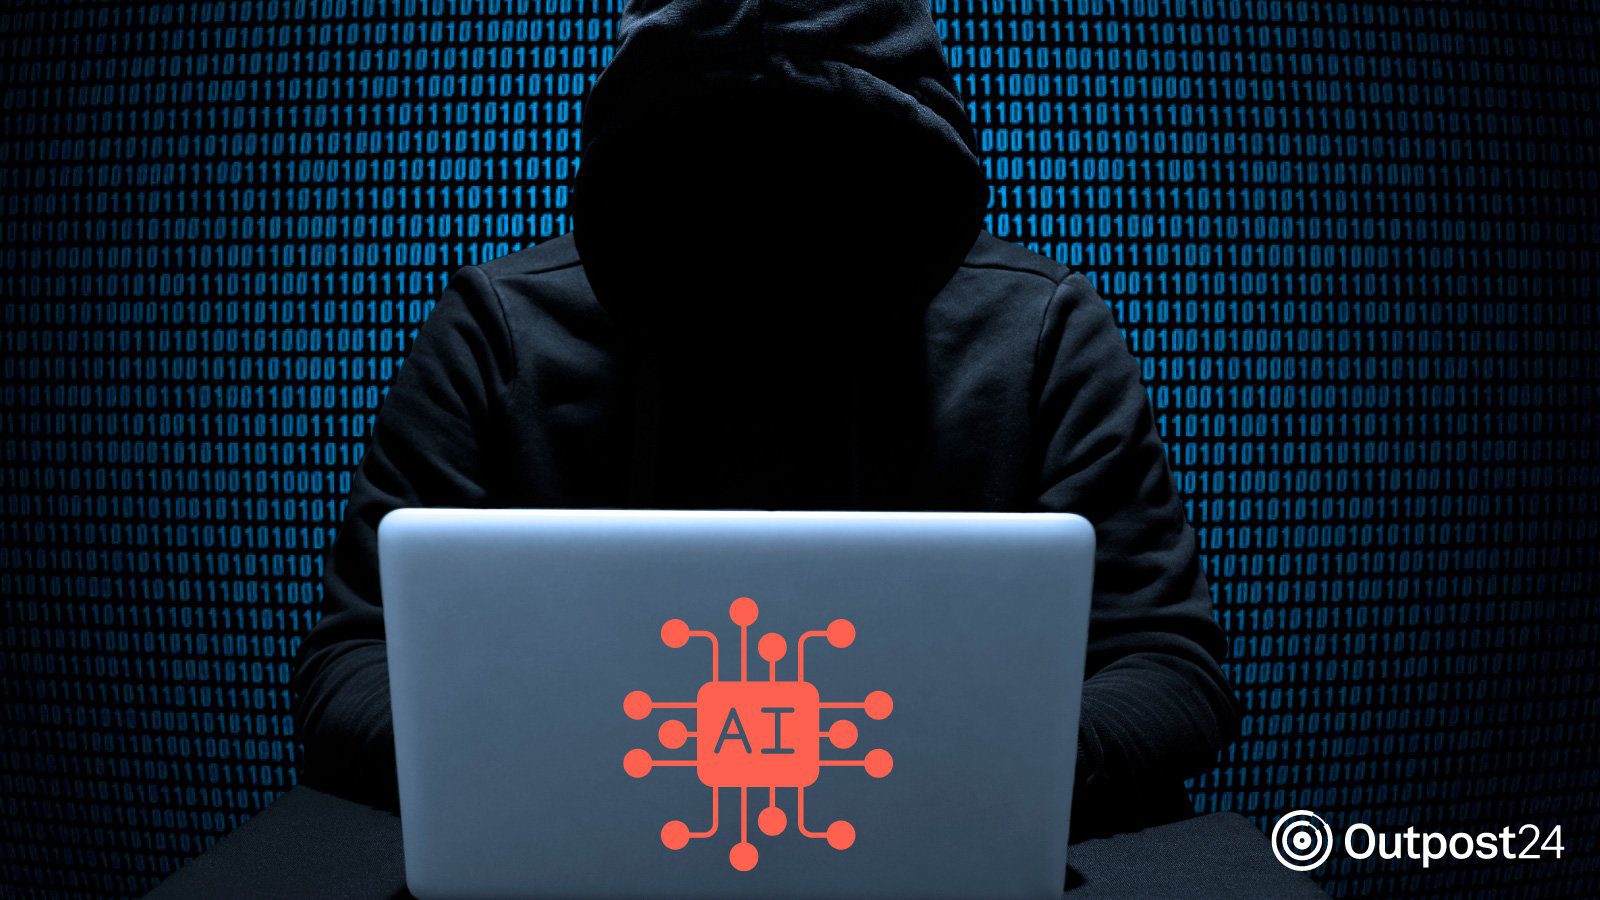 How To Secure Web Applications Against AI-assisted Cyber Attacks – Source: www.bleepingcomputer.com